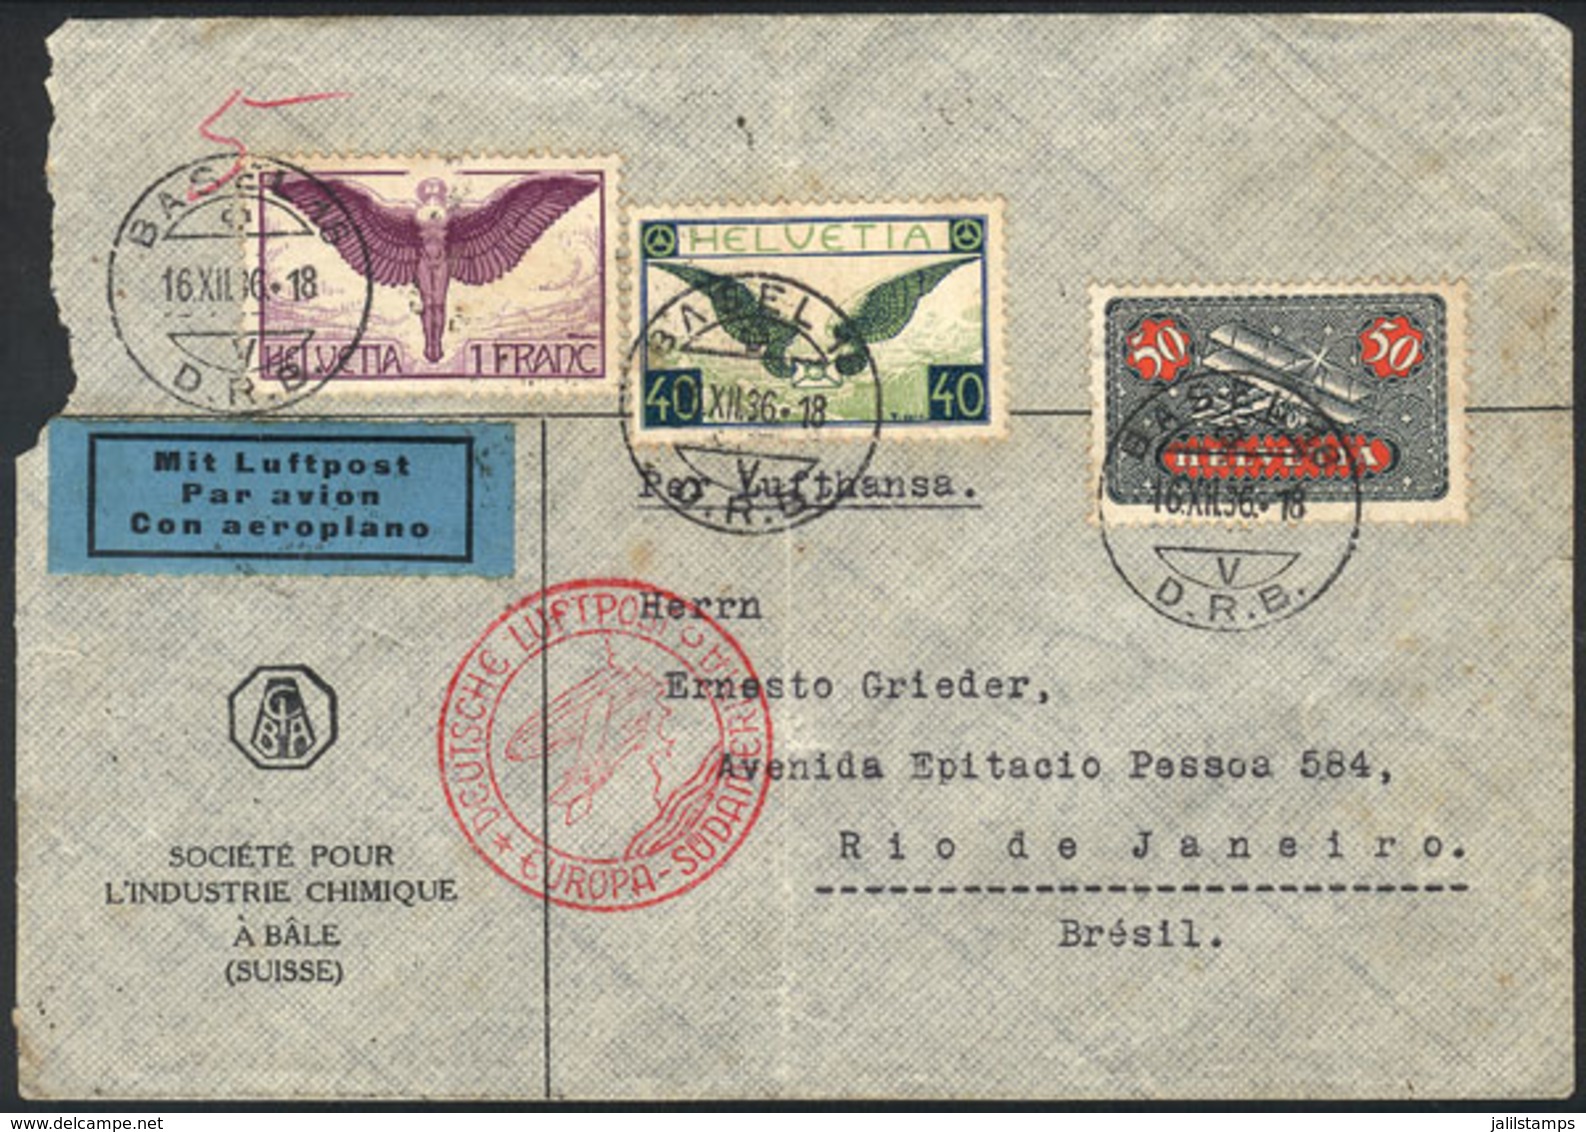 SWITZERLAND: Airmail Cover Sent From Basel To Rio De Janeiro On 16/DE/1936 By Germany DLH Franked With 1.90Fr., Interest - ...-1845 Prephilately